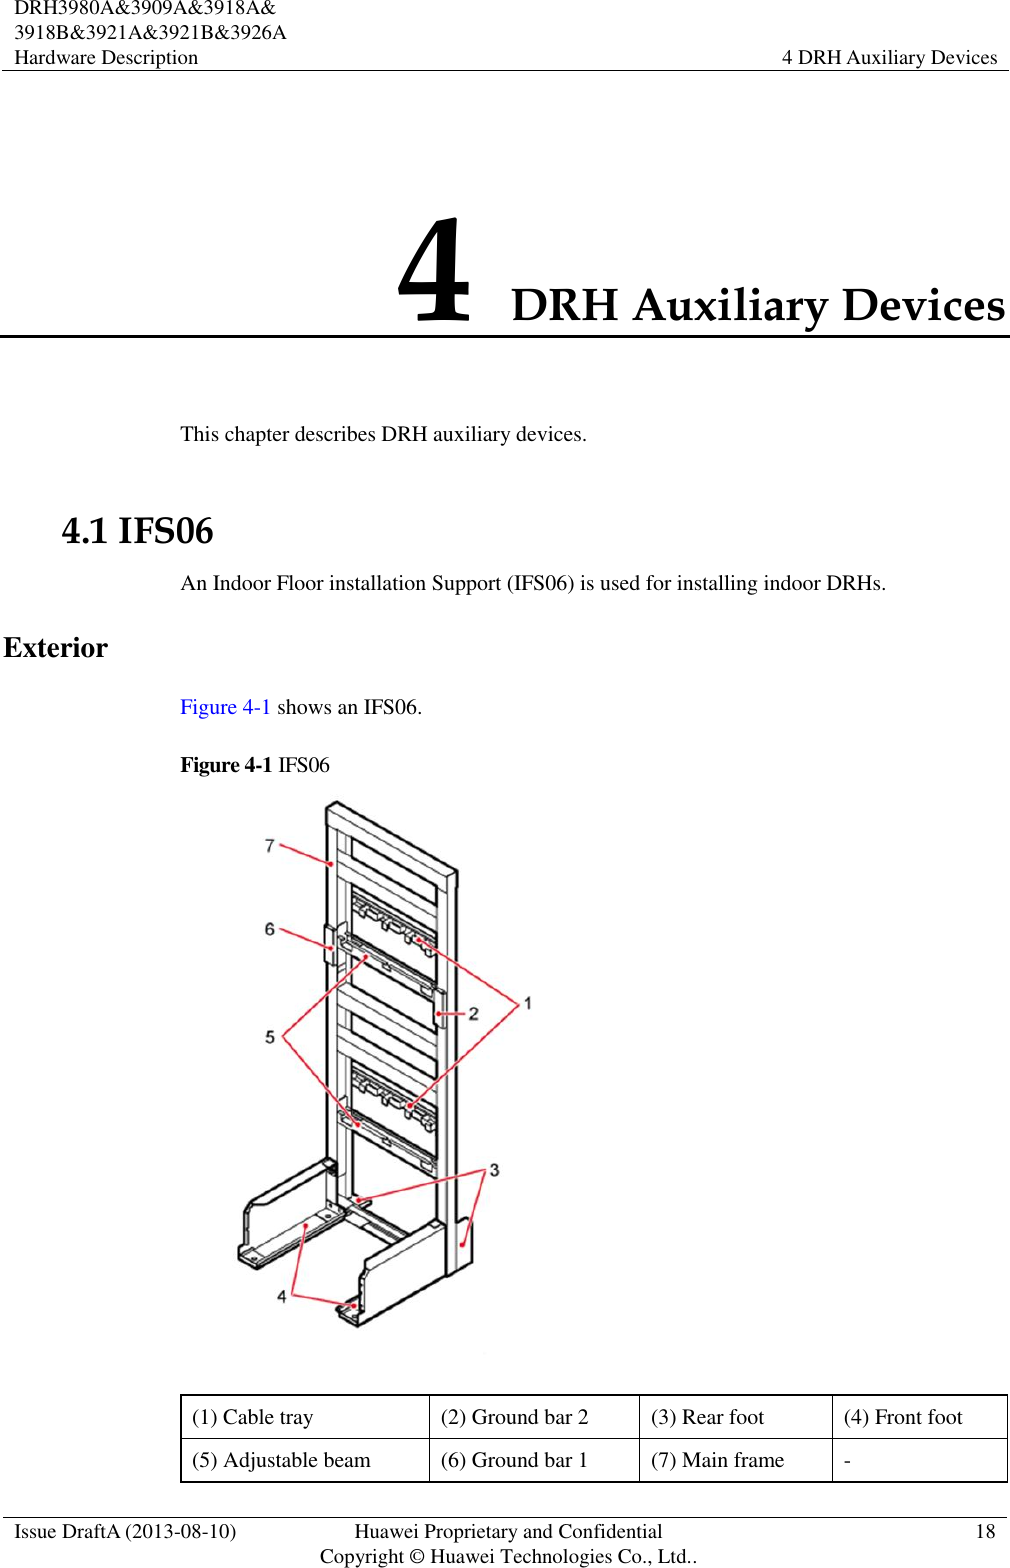  DRH3980A&amp;3909A&amp;3918A&amp; 3918B&amp;3921A&amp;3921B&amp;3926A Hardware Description   4 DRH Auxiliary Devices  Issue DraftA (2013-08-10) Huawei Proprietary and Confidential                                     Copyright © Huawei Technologies Co., Ltd.. 18    4 DRH Auxiliary Devices This chapter describes DRH auxiliary devices. 4.1 IFS06 An Indoor Floor installation Support (IFS06) is used for installing indoor DRHs. Exterior Figure 4-1 shows an IFS06. Figure 4-1 IFS06  (1) Cable tray (2) Ground bar 2 (3) Rear foot (4) Front foot (5) Adjustable beam   (6) Ground bar 1 (7) Main frame - 